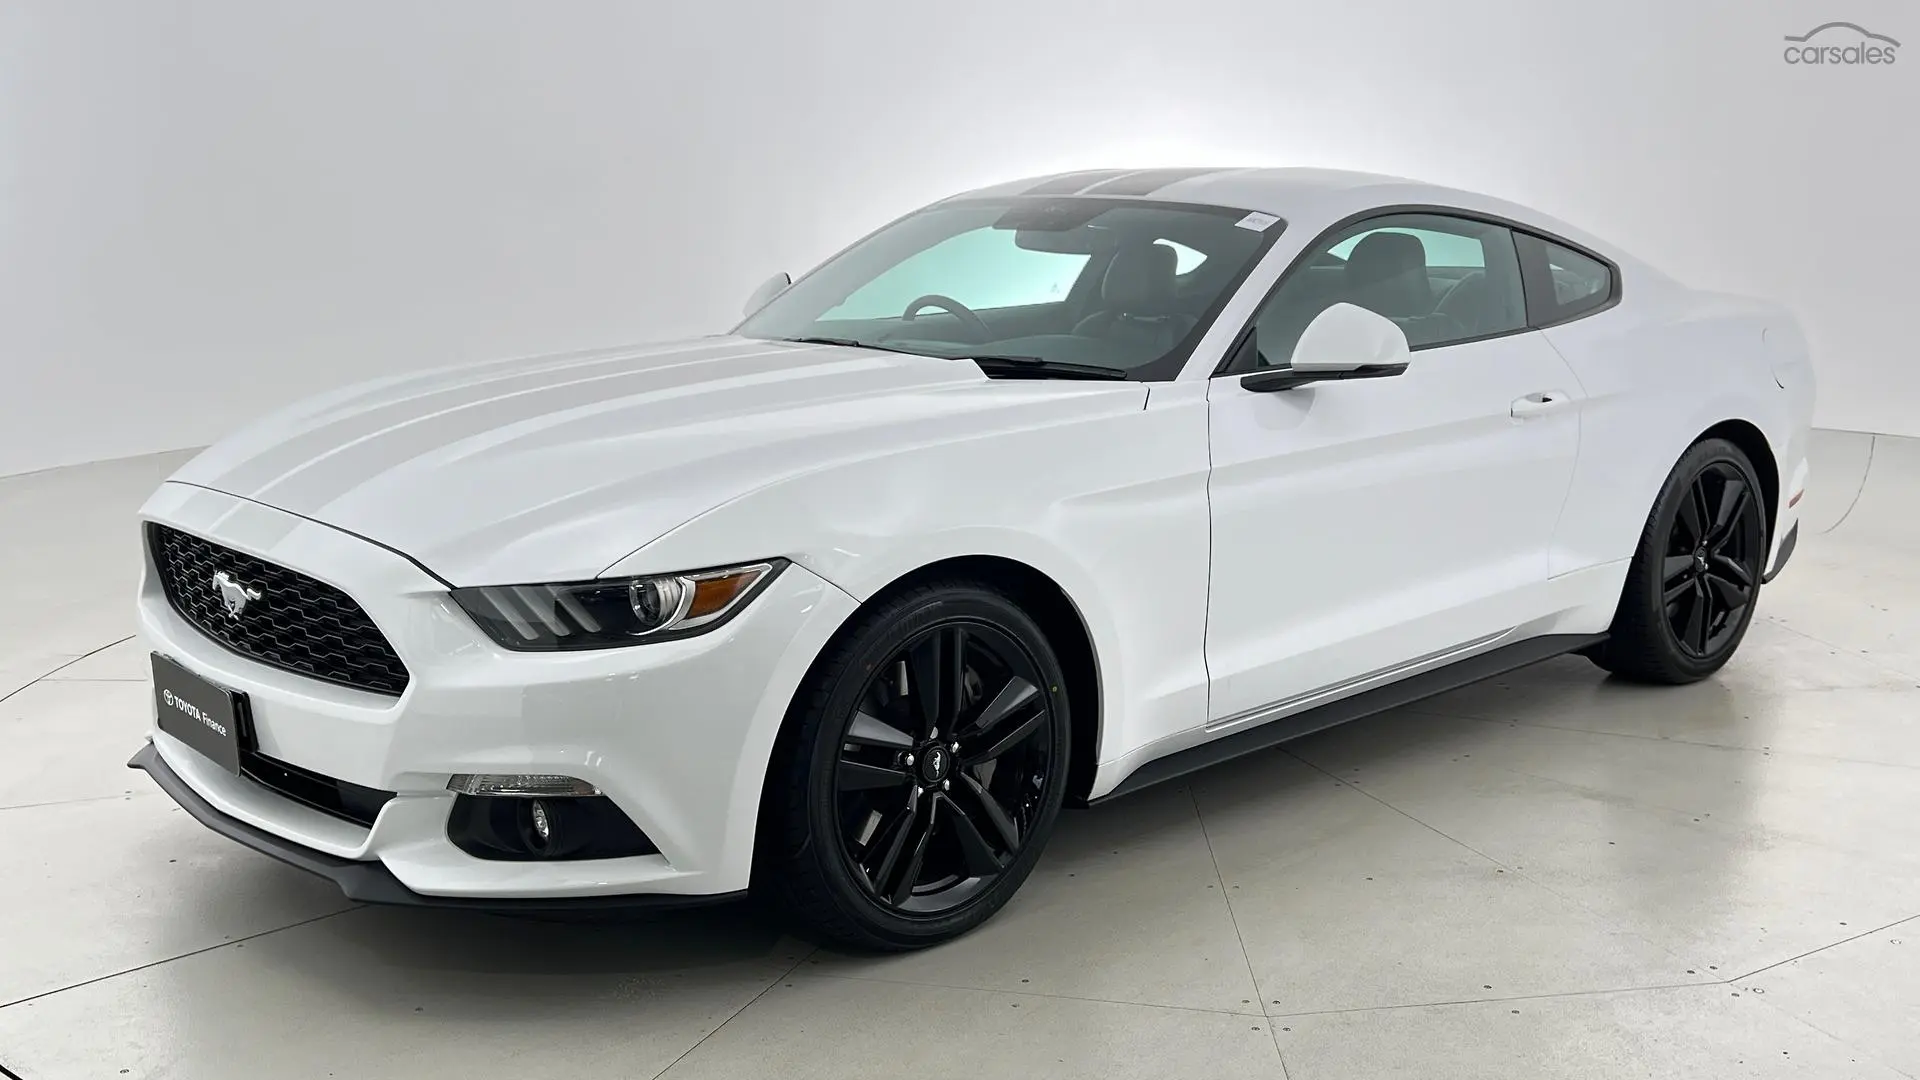 2016 Ford Mustang Image 8